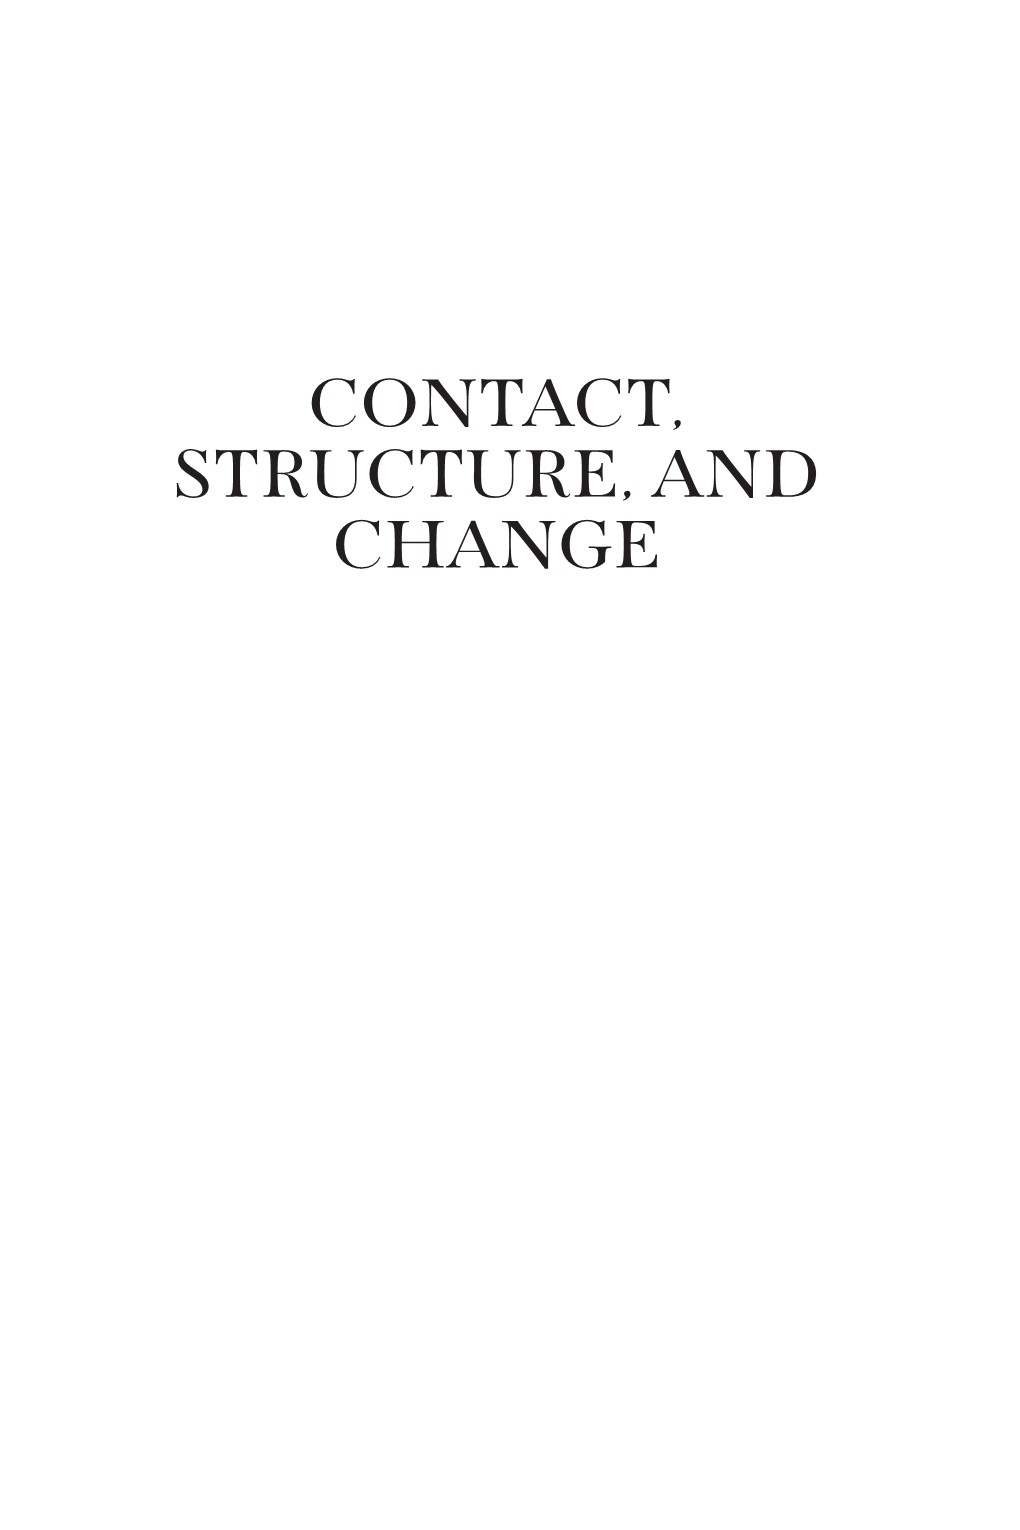 Contact, Structure, and Change